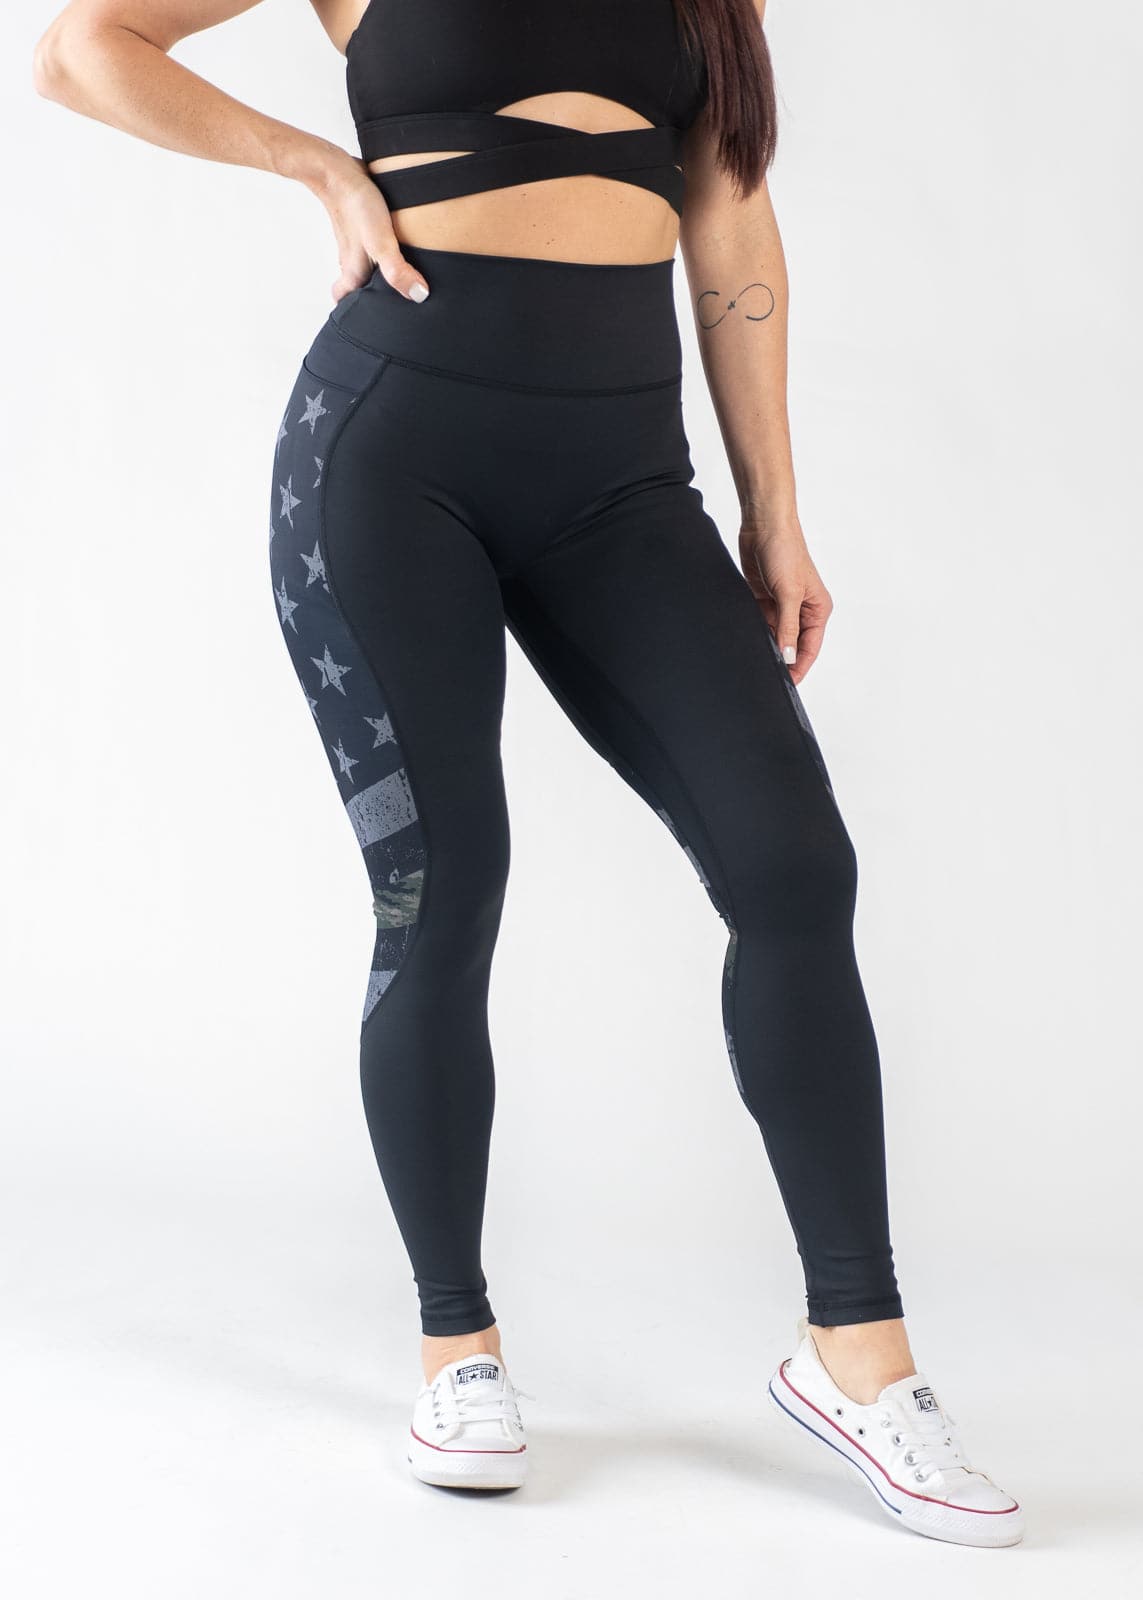 Chest Down Front View with Hand on Lower Back Wearing Empowered Leggings | Camo Line